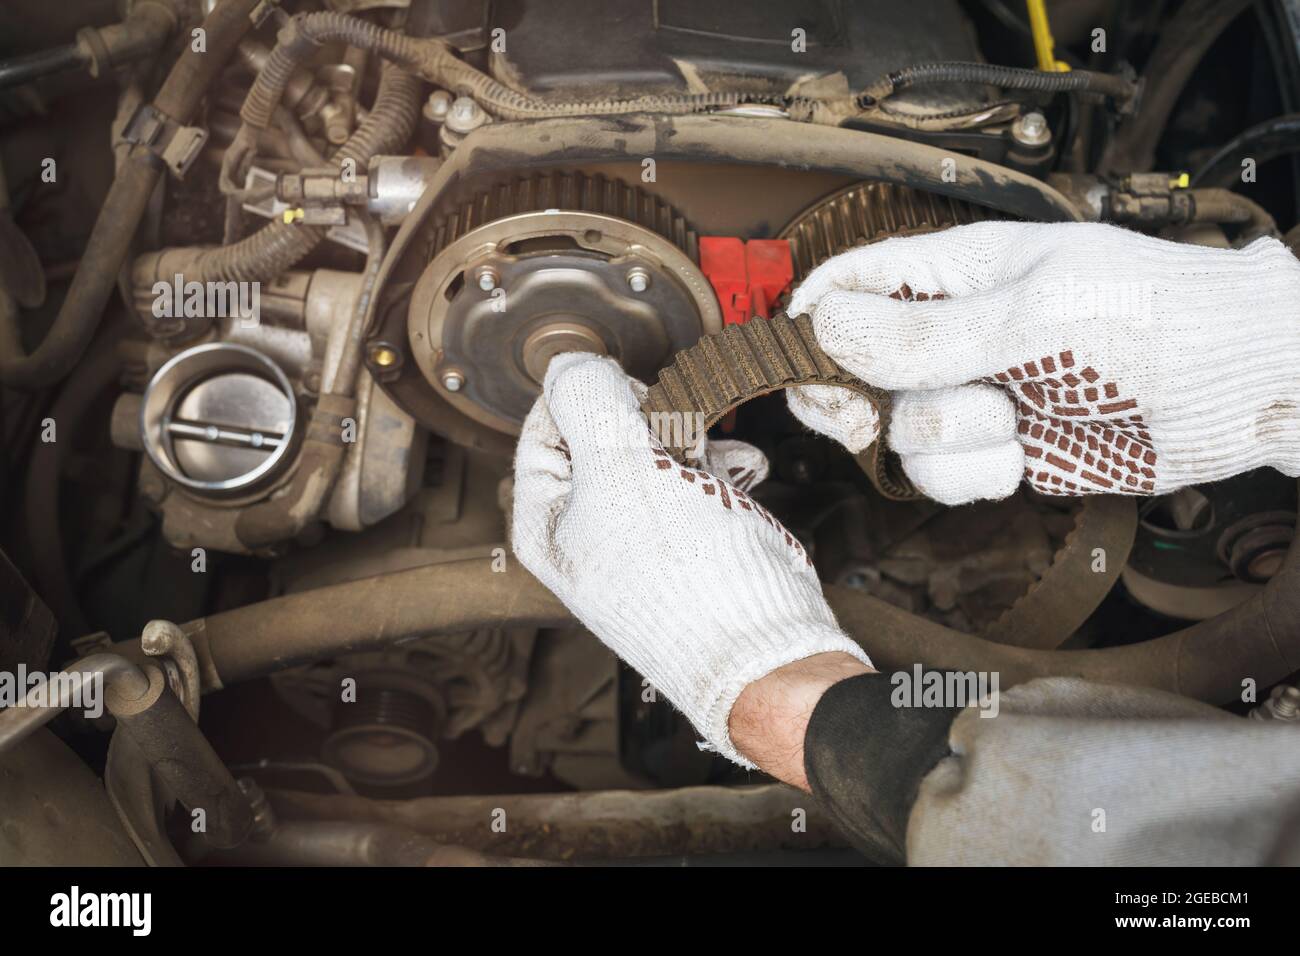 An auto mechanic checks the condition of an old timing belt for various defects, close-up Stock Photo